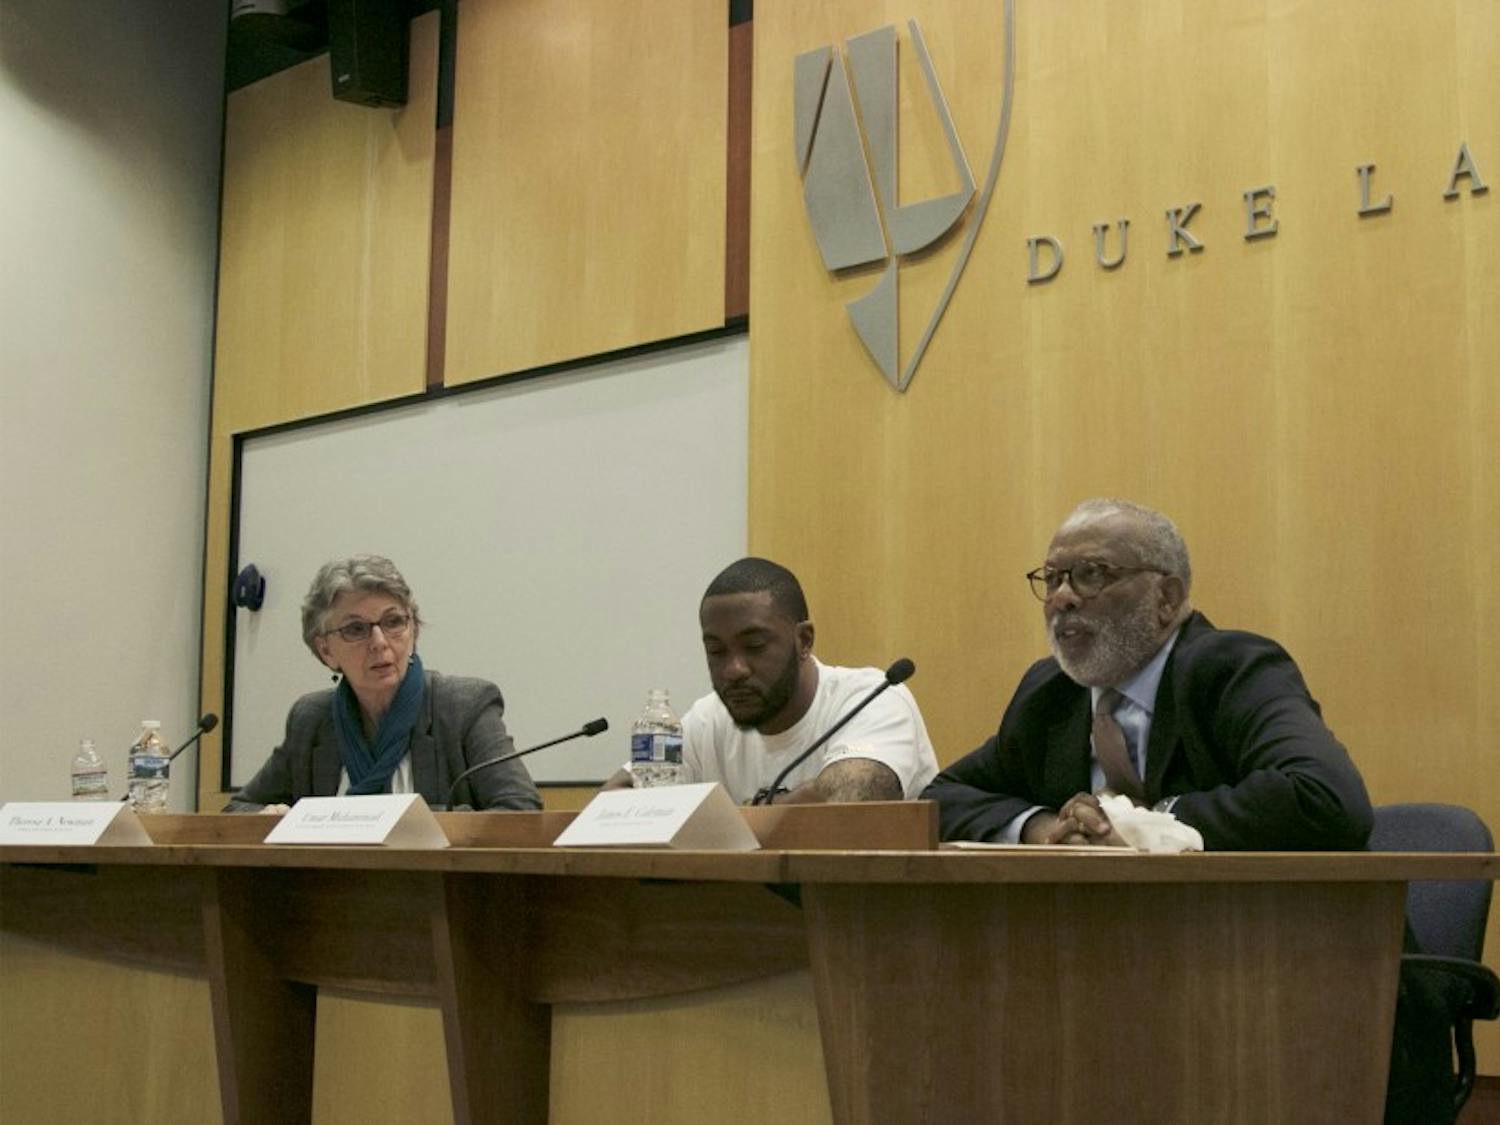 James Coleman and Thersea Newman (far right and far left) serve as co-directors of Duke’s Wrongful Conviction Clinic, which investigates incarcerated felons’ claims of innocence.